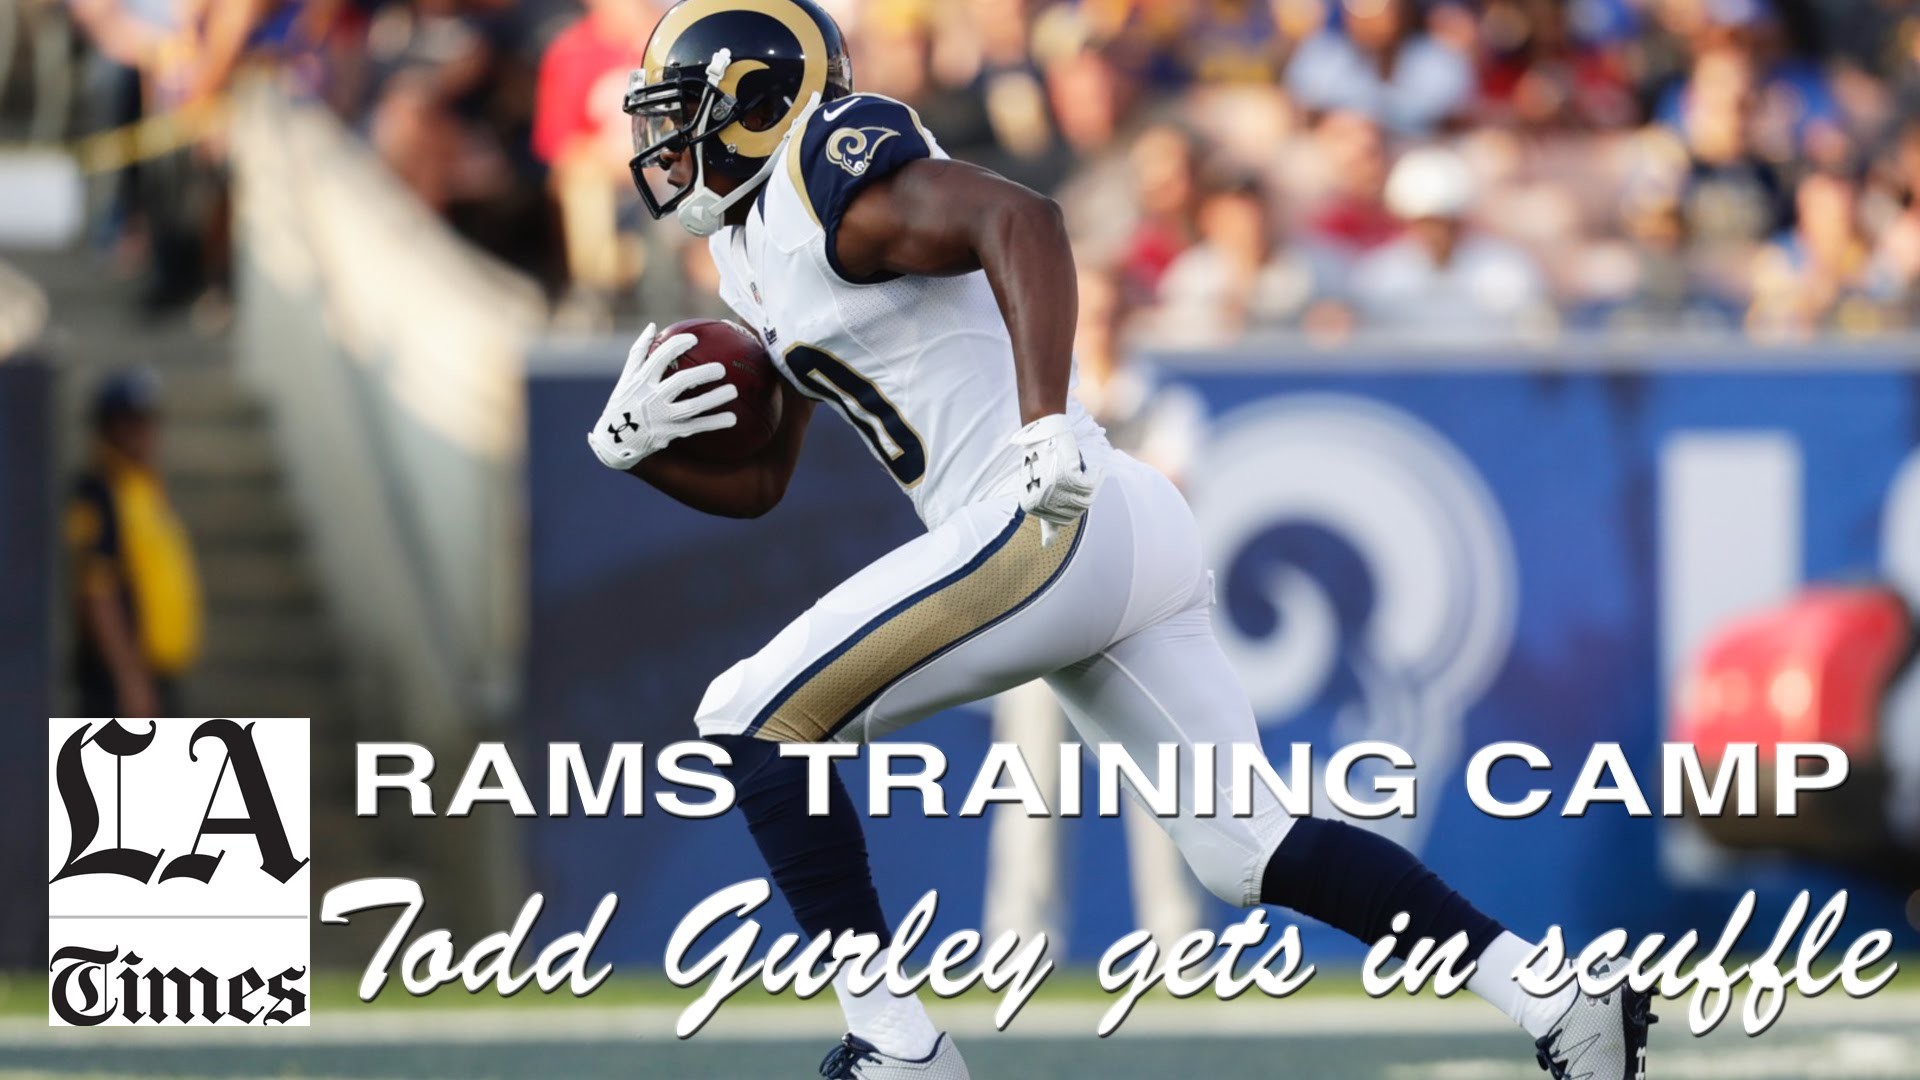 Todd Gurley, Rams players break out in scuffle during practice